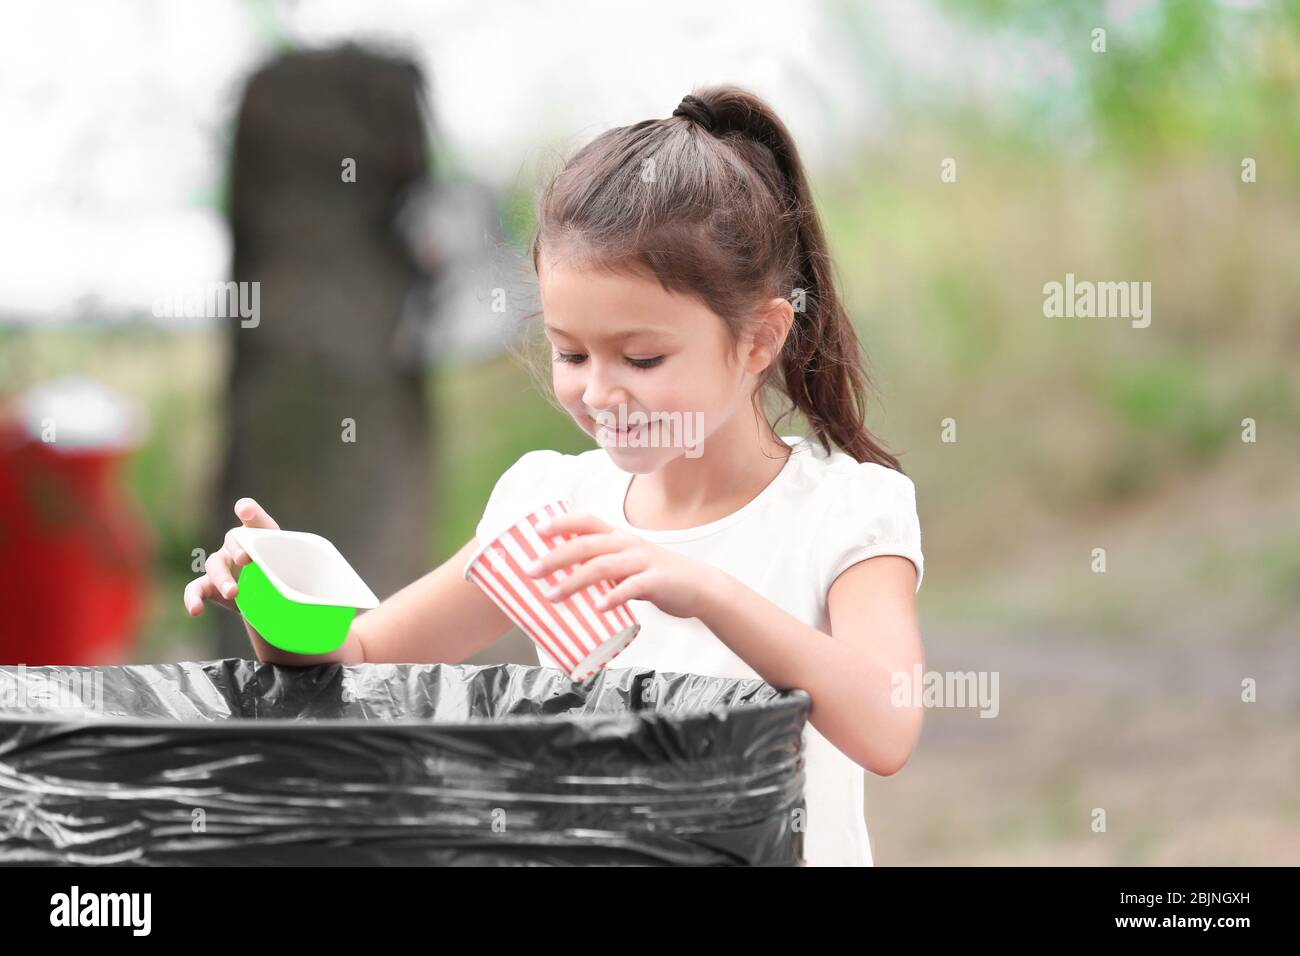 Little girl throwing garbage into litter bin outdoors Stock Photo